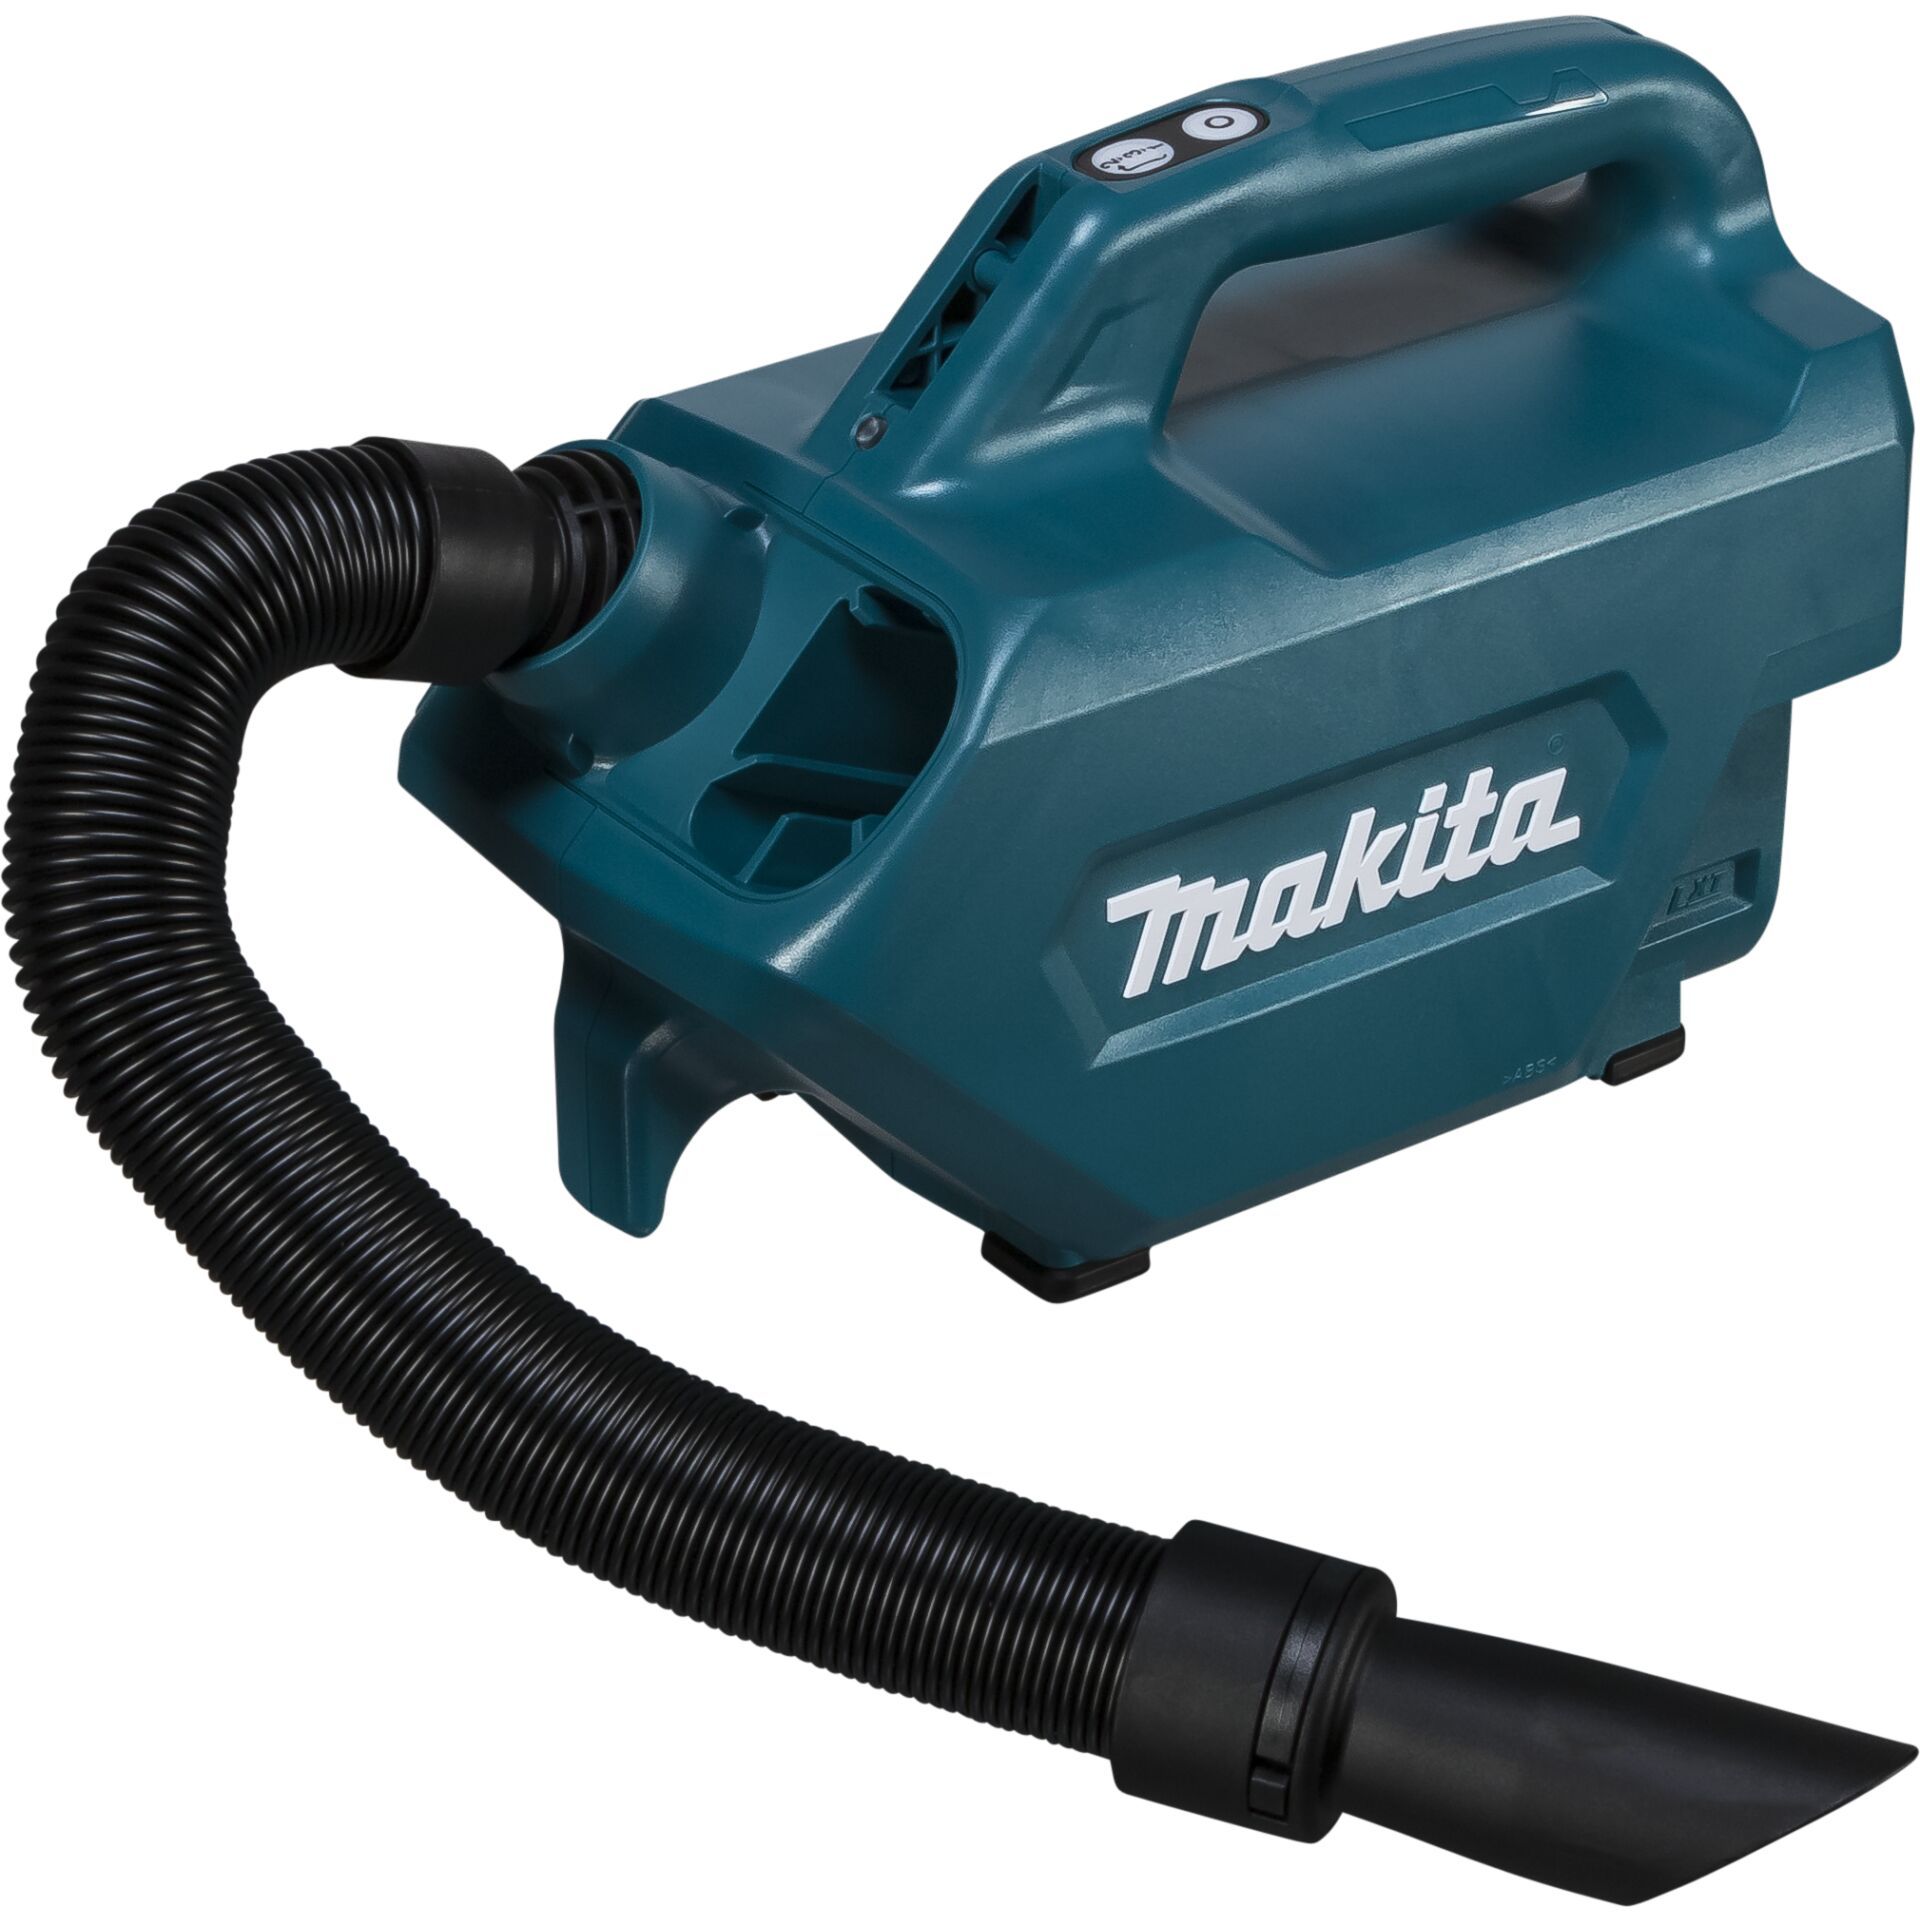 Makita DCL184Z Cordless Vacuum Cleaner